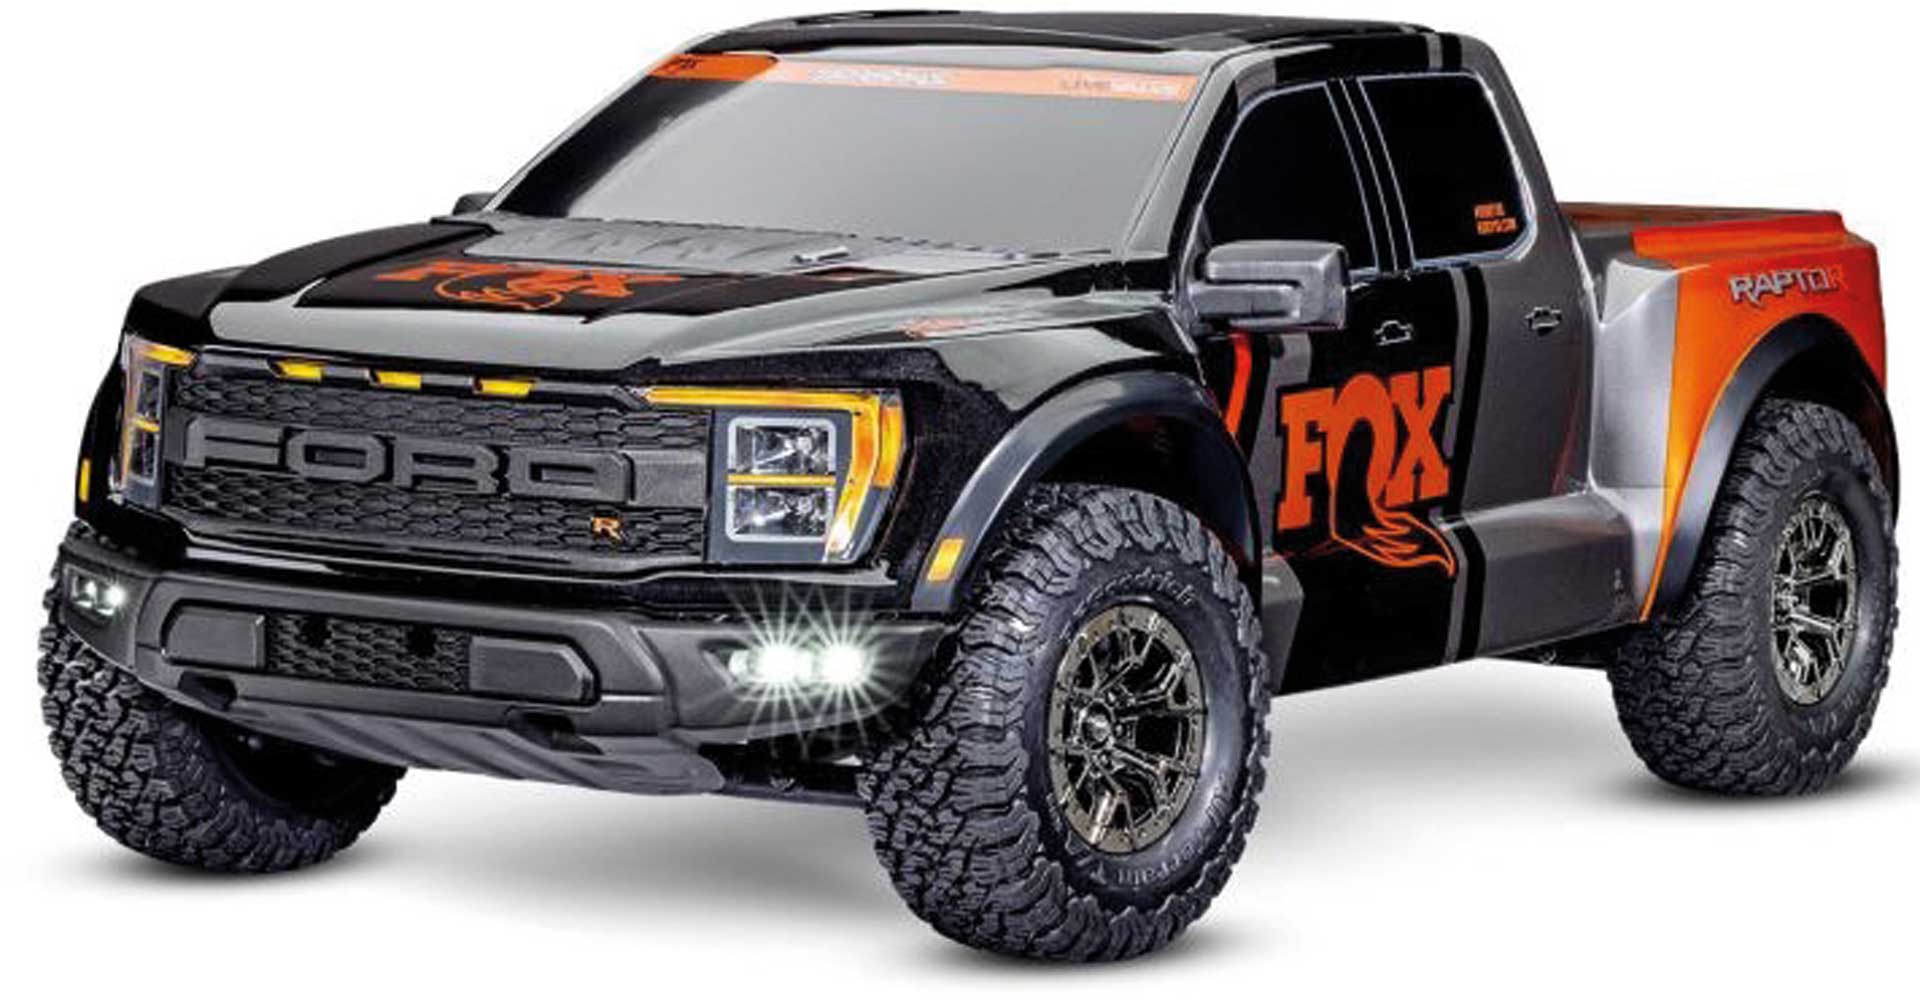 TRAXXAS FORD RAPTOR-R 4X4 VXL NOIR 1/10 PRO-SCALE RTR BRUSHLESS SANS ACCU/CHARGEUR SPECIAL-EDITION